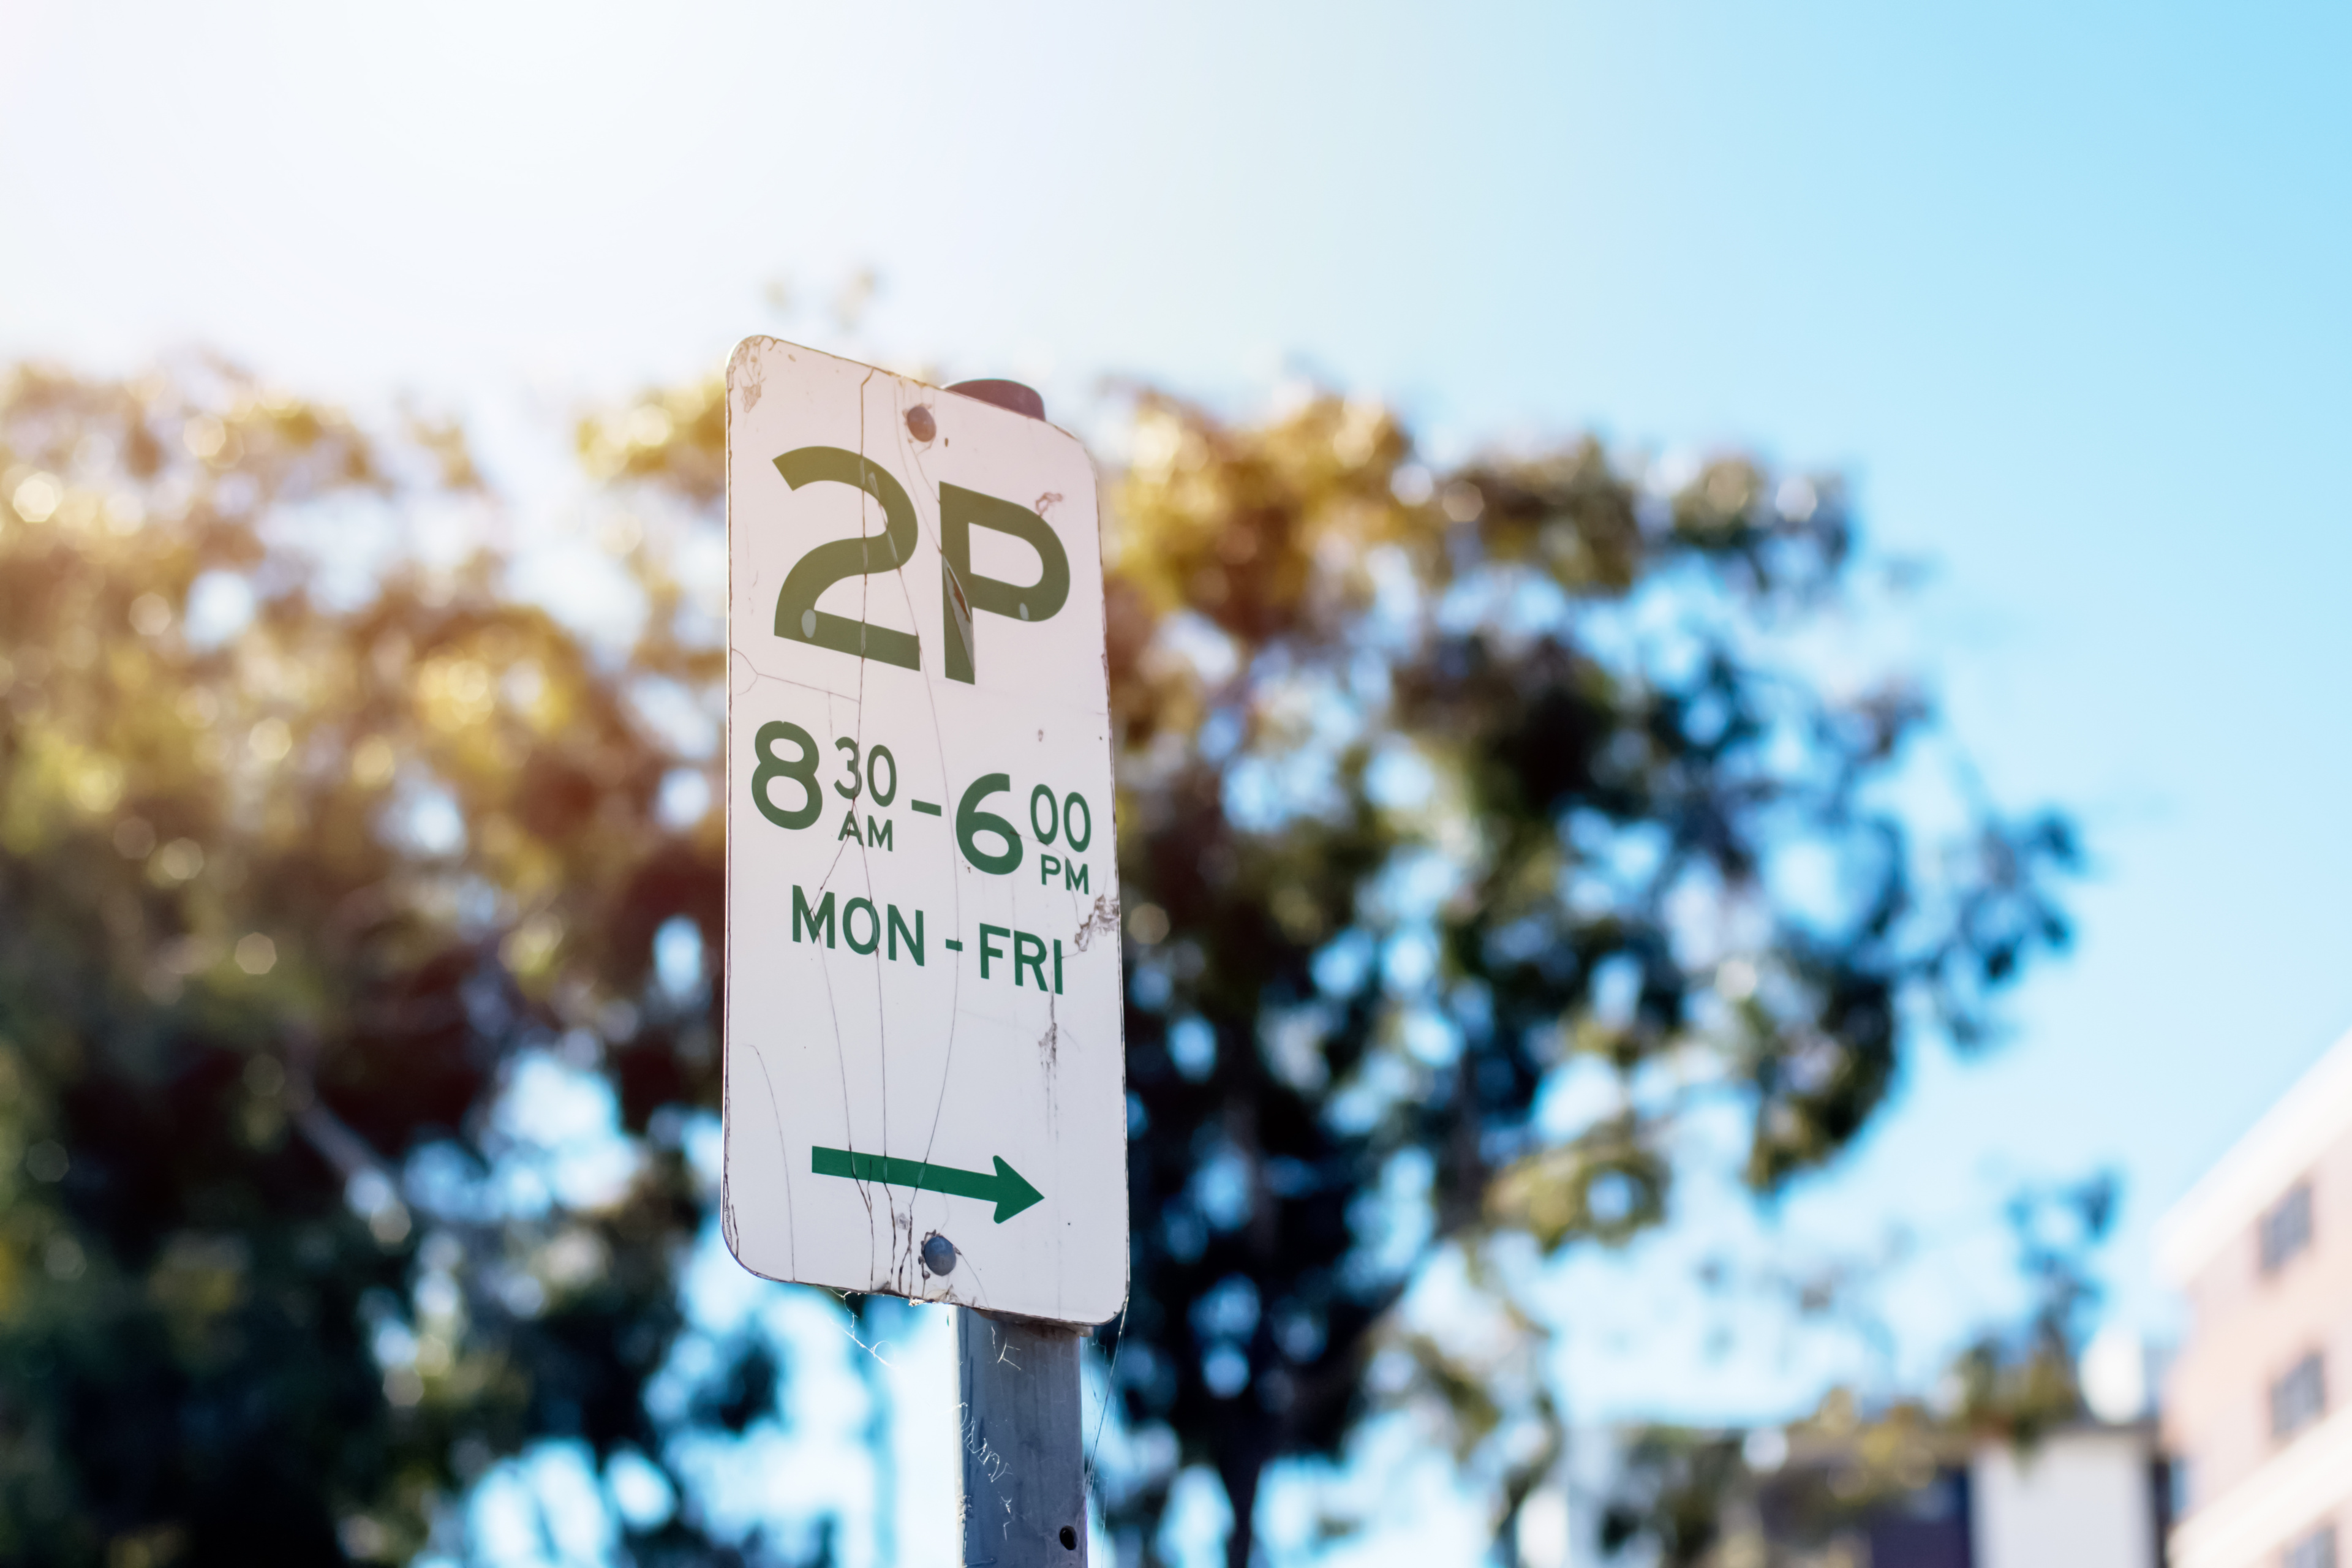 Street Parking Sign With Parking Rules Not To Park For More Than Two Hours 2p On Weekday Mornings In New South Wales, Australia